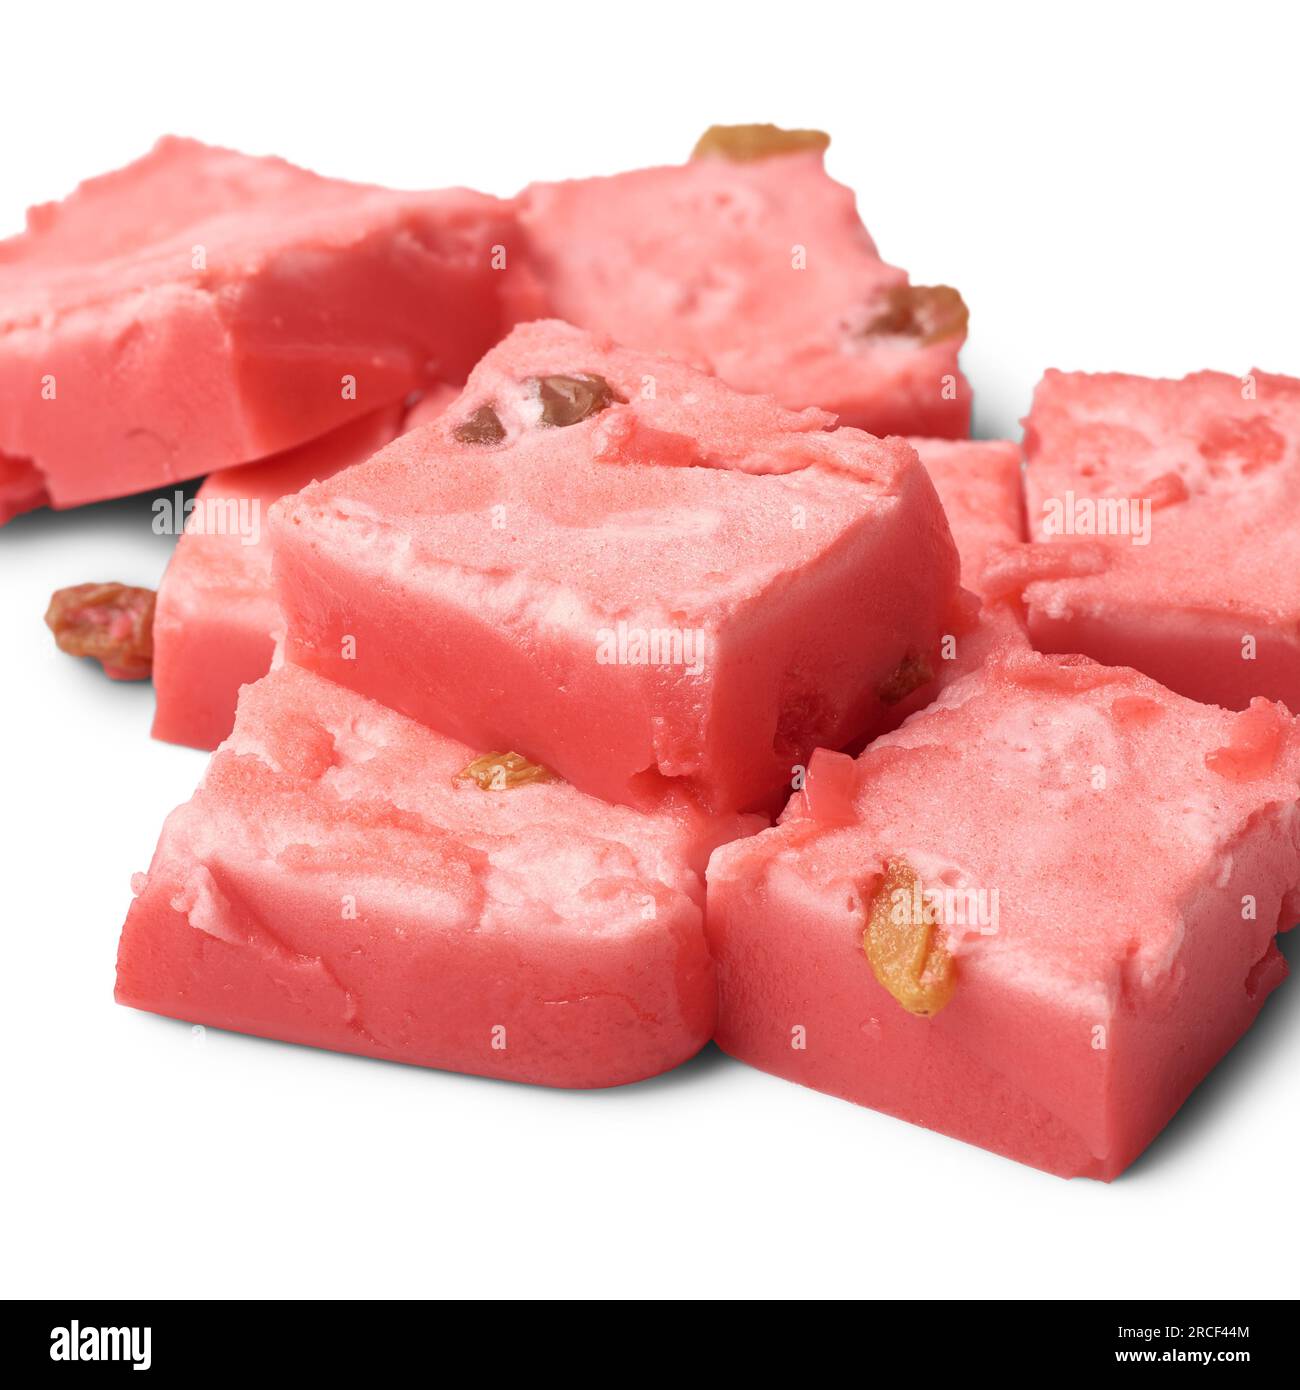 cubes of jelly pudding, close-up of delicious sweet dish made with fresh cream, condensed milk and strawberry jelly and spread prune isolated on white Stock Photo